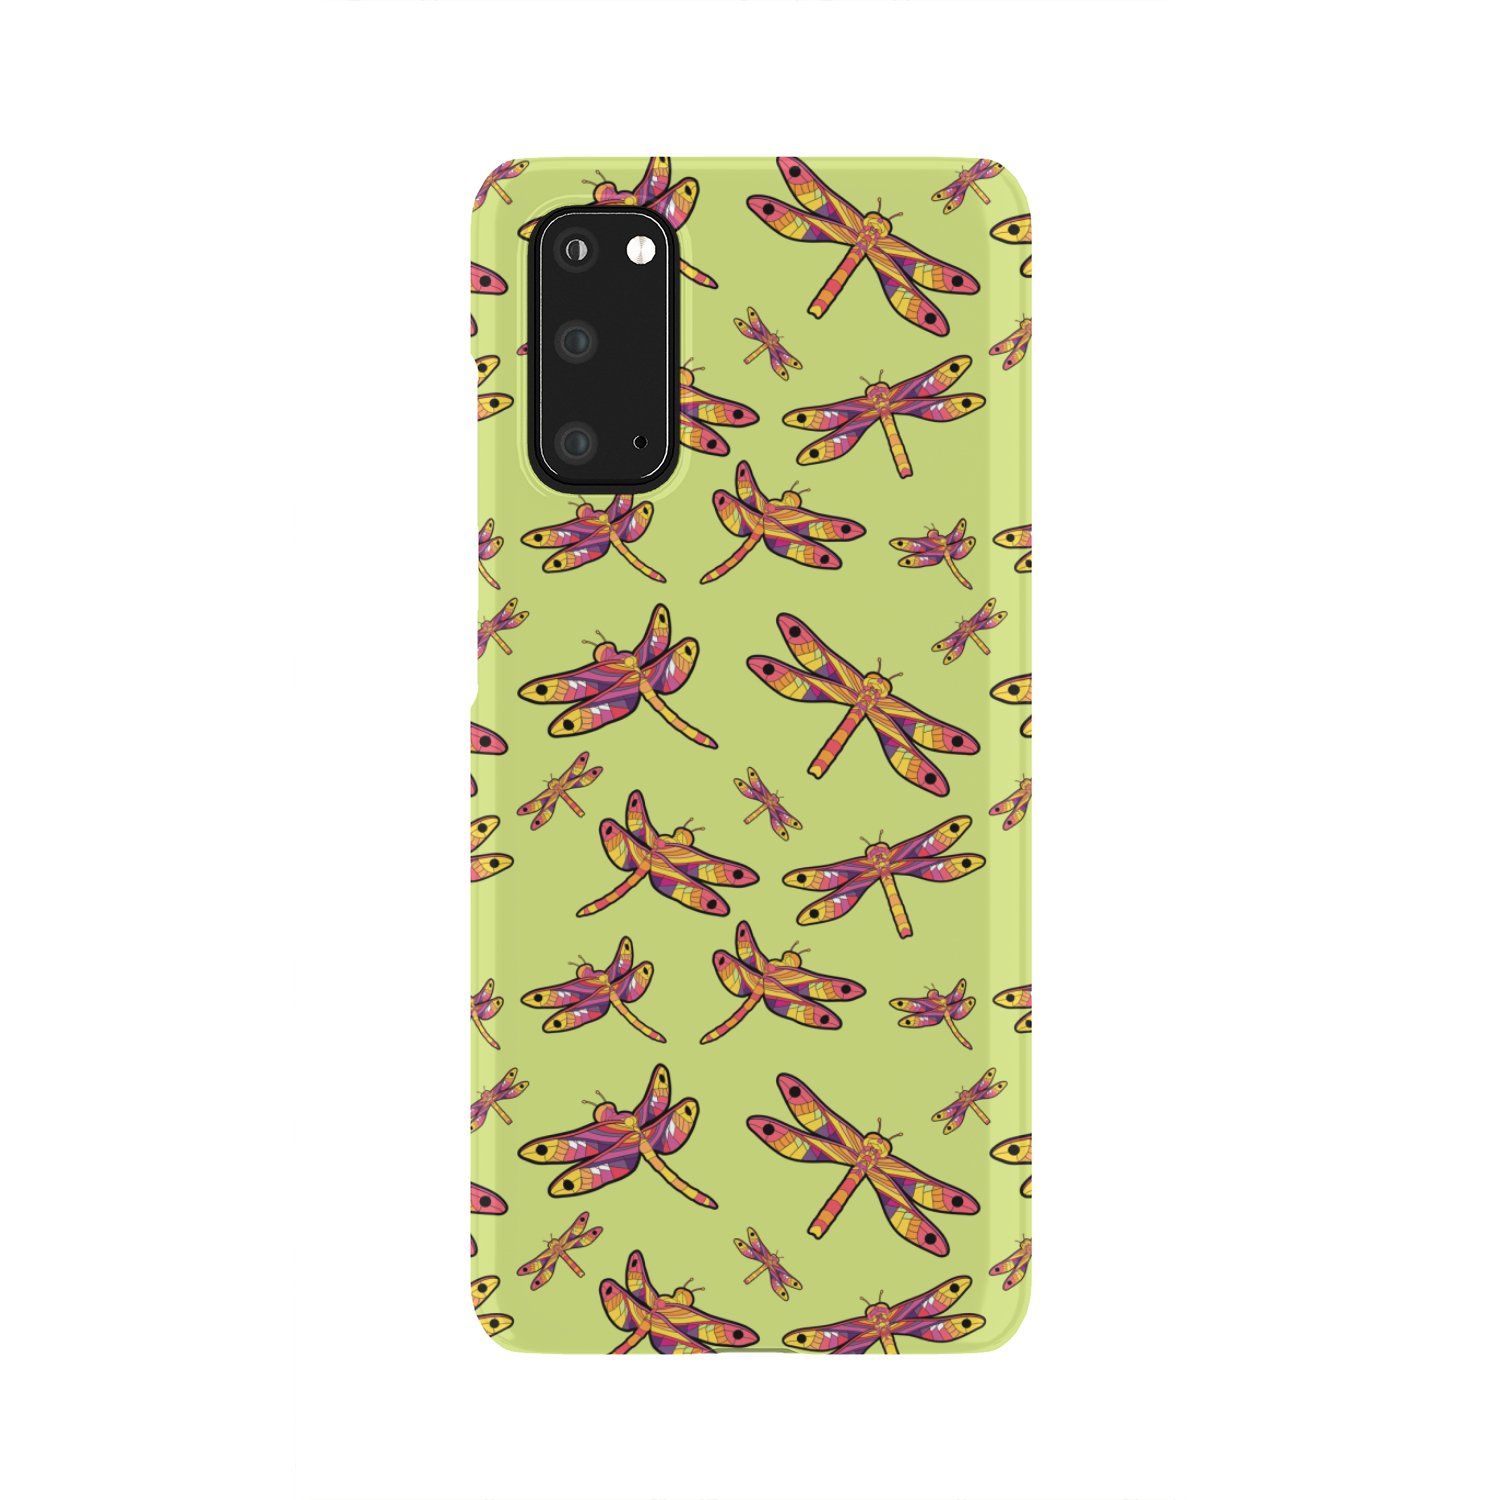 Gathering Lime Phone Case Phone Case wc-fulfillment Samsung Galaxy S20 